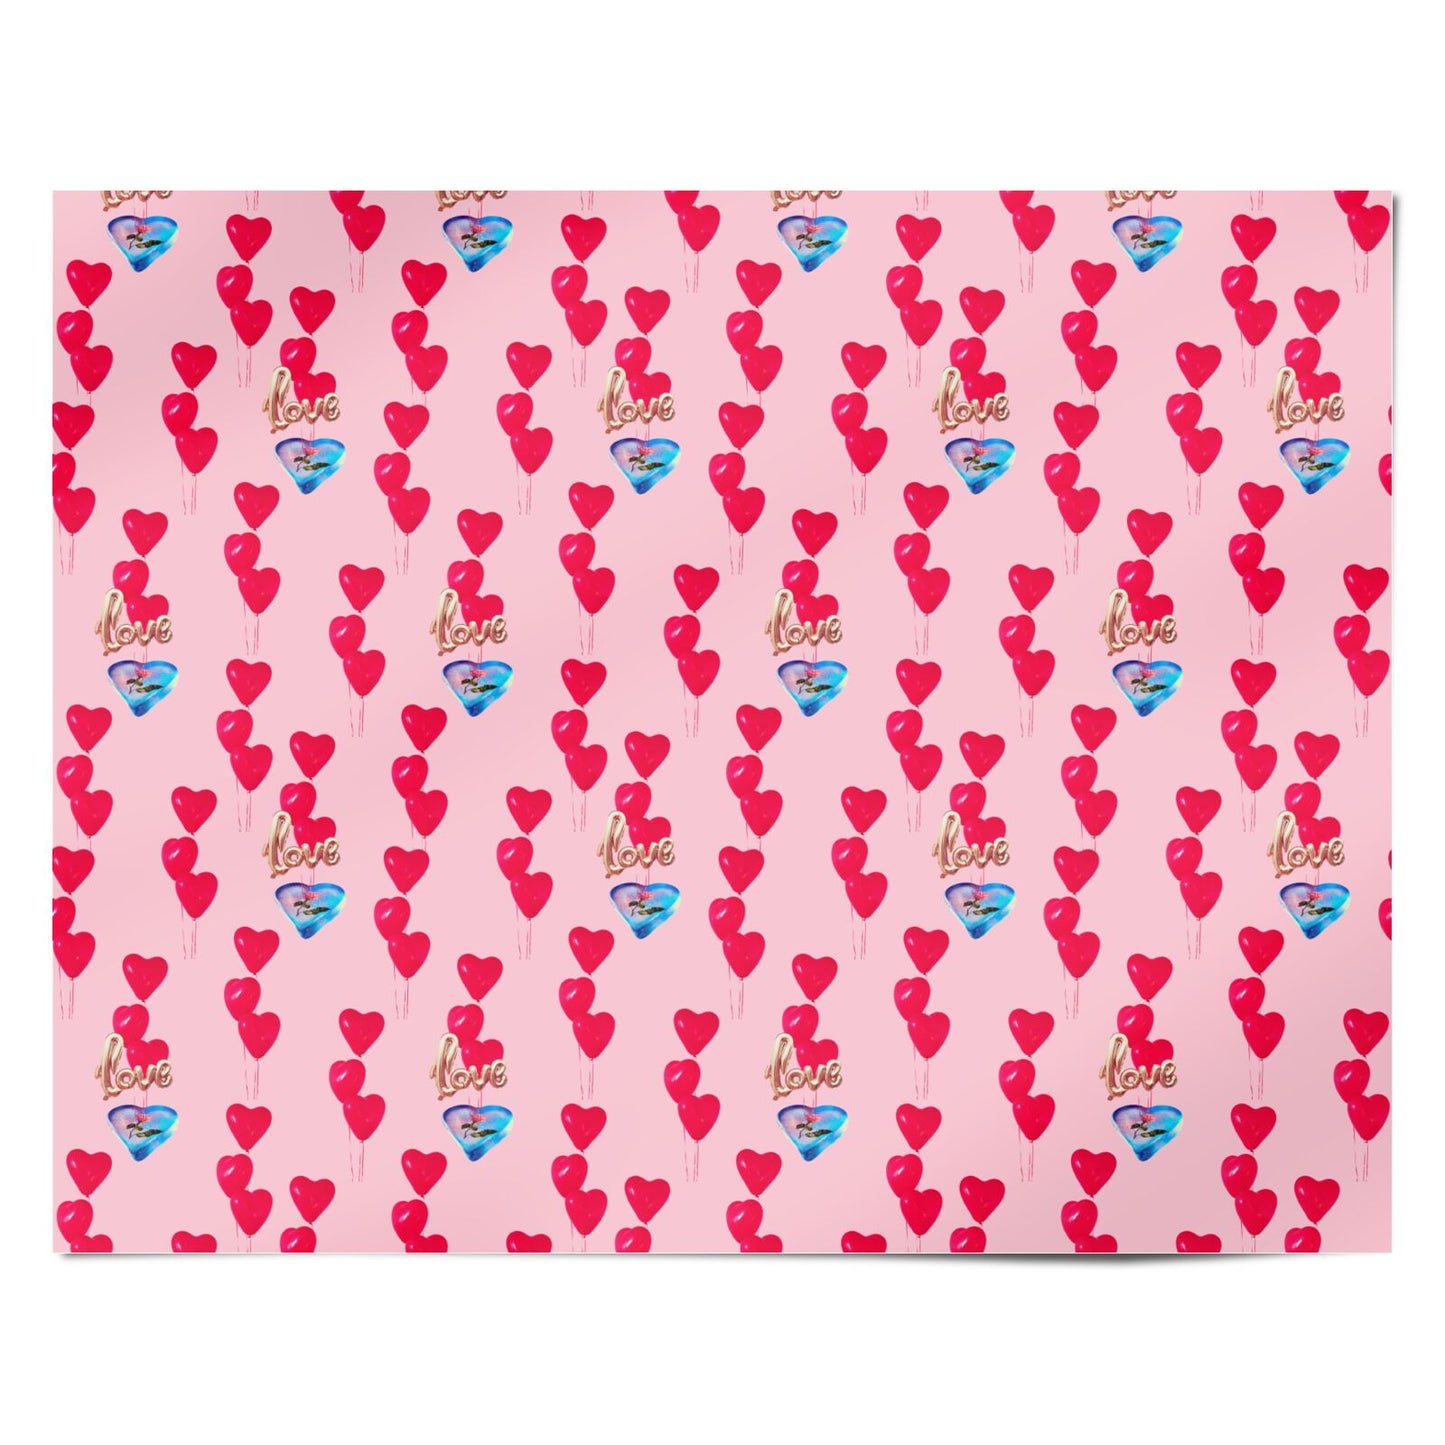 Love bubble balloon Personalised Wrapping Paper Alternative